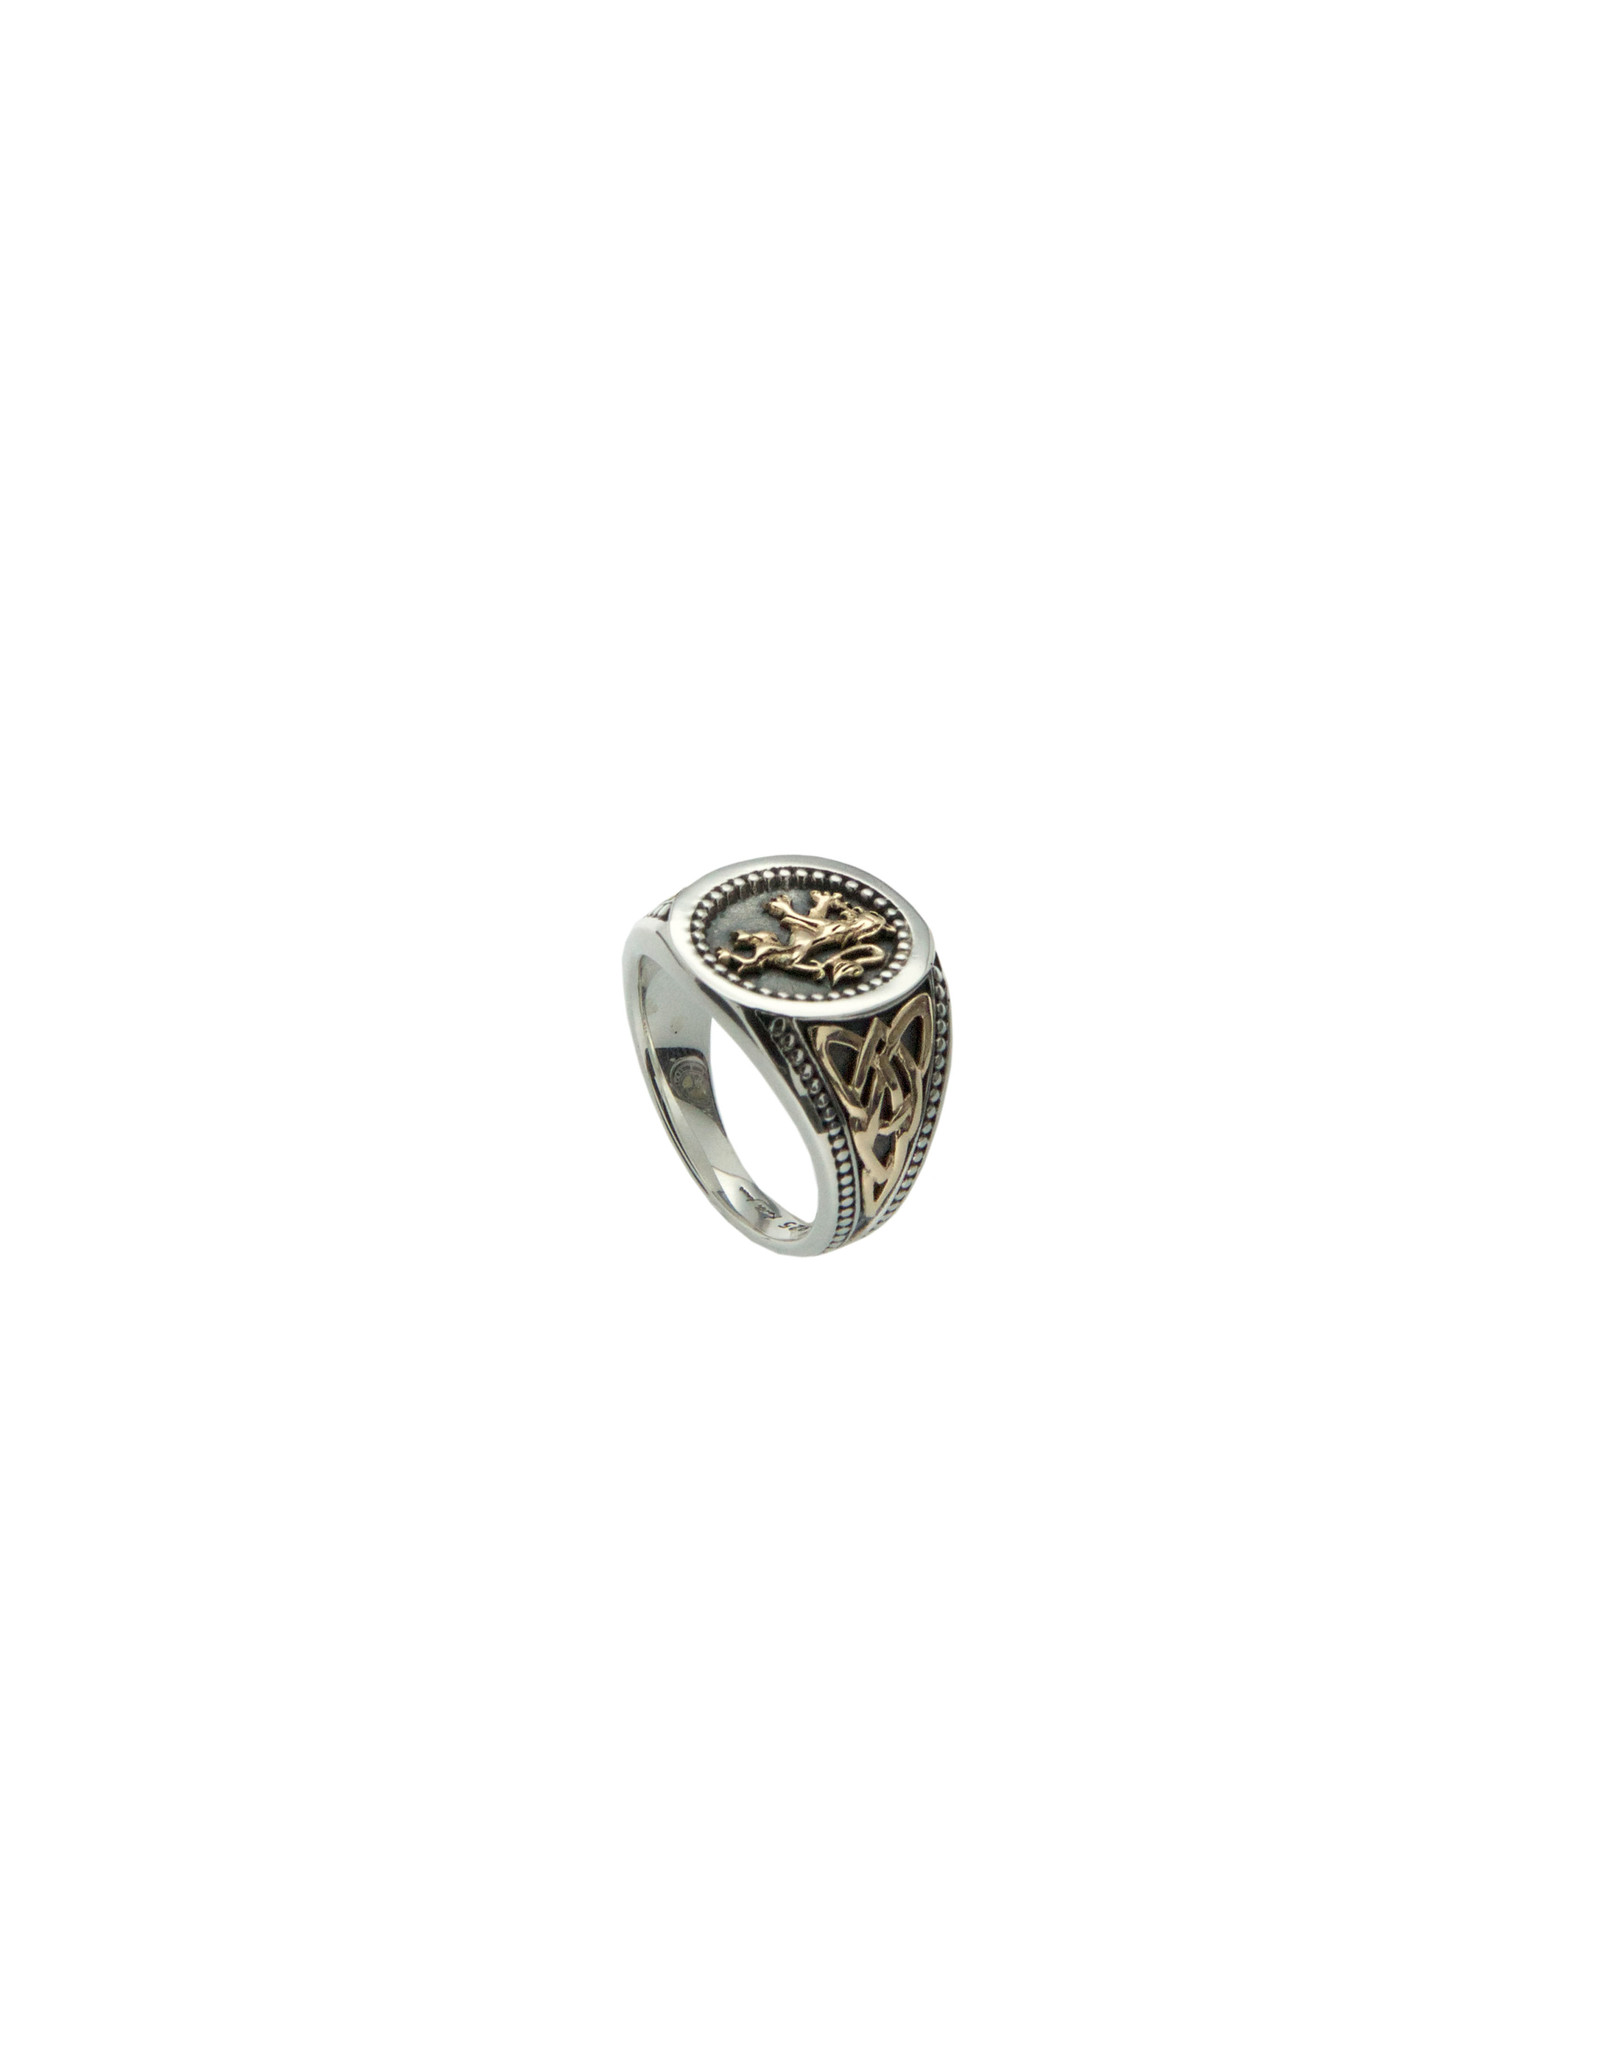 Keith Jack Rampant Lion Ring SS/10KY